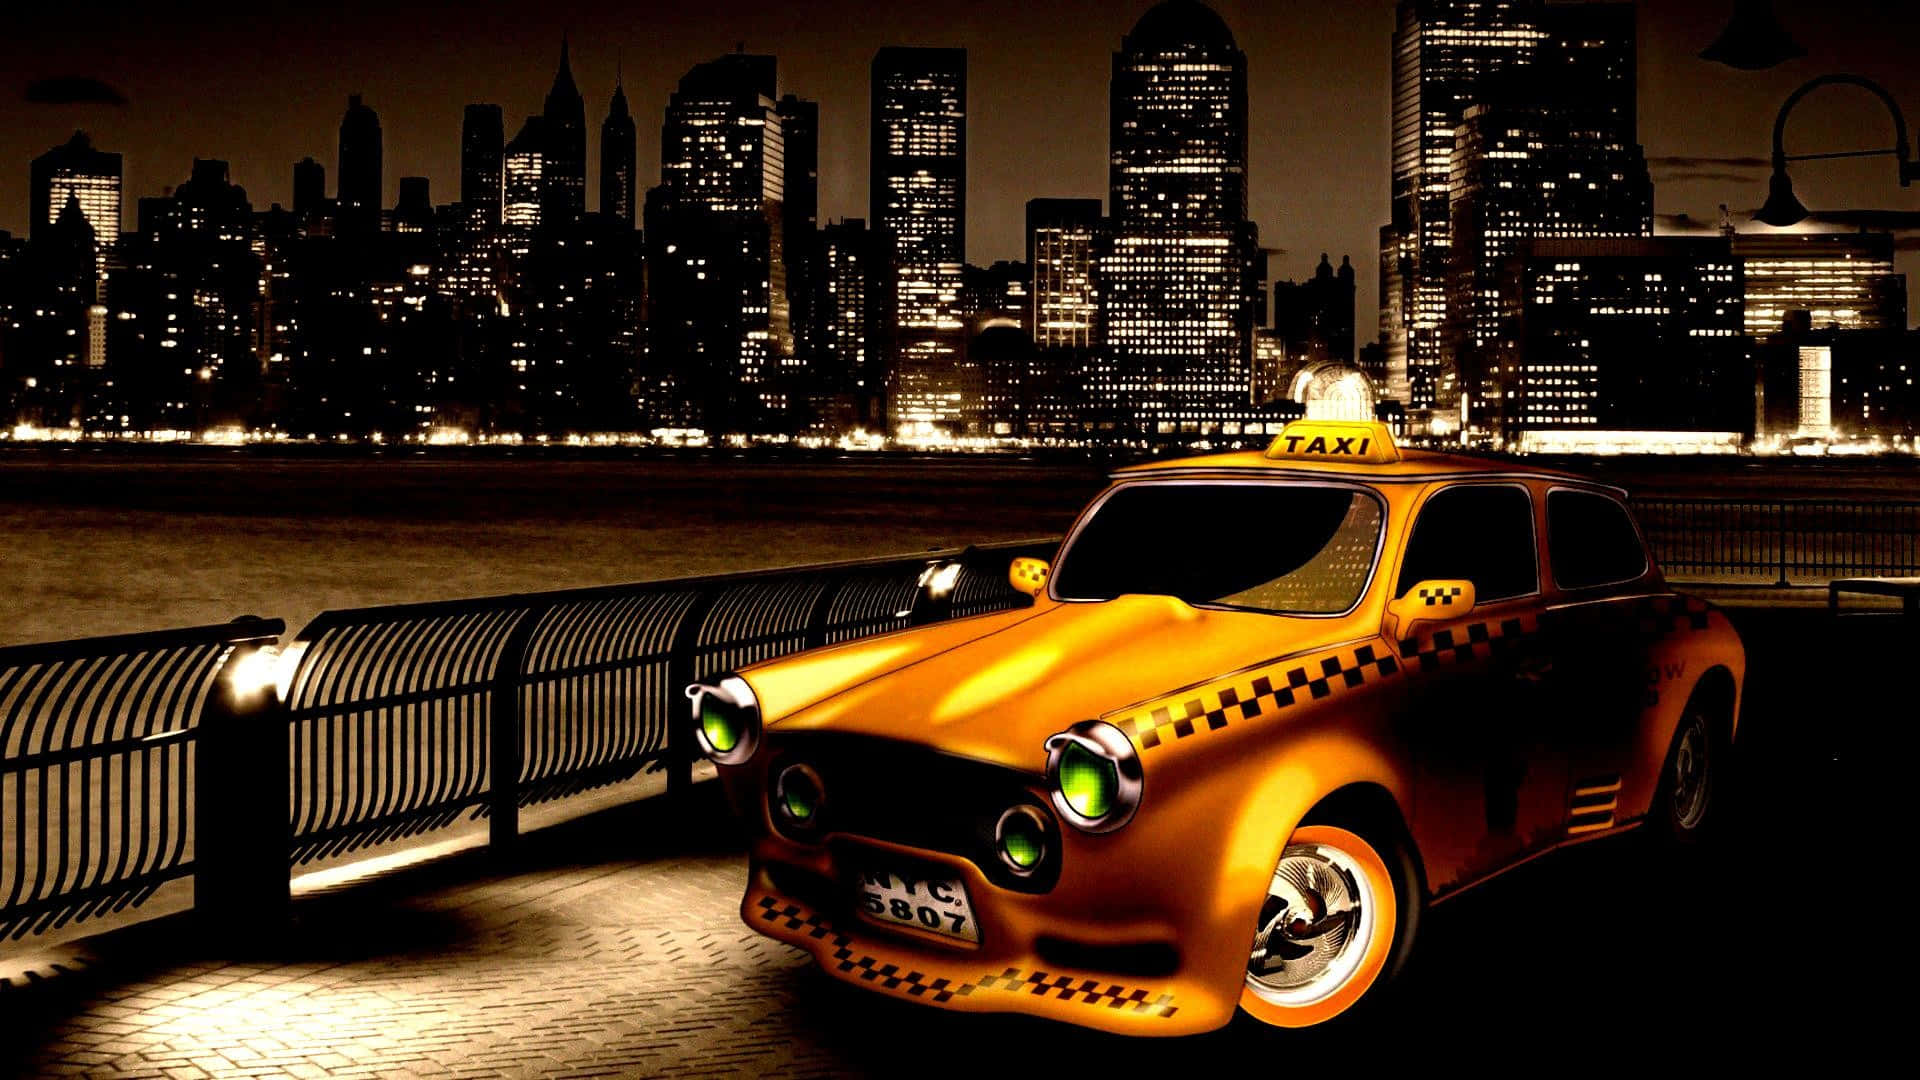 Take a Ride with Us - Your Safe and Reliable Taxi Service